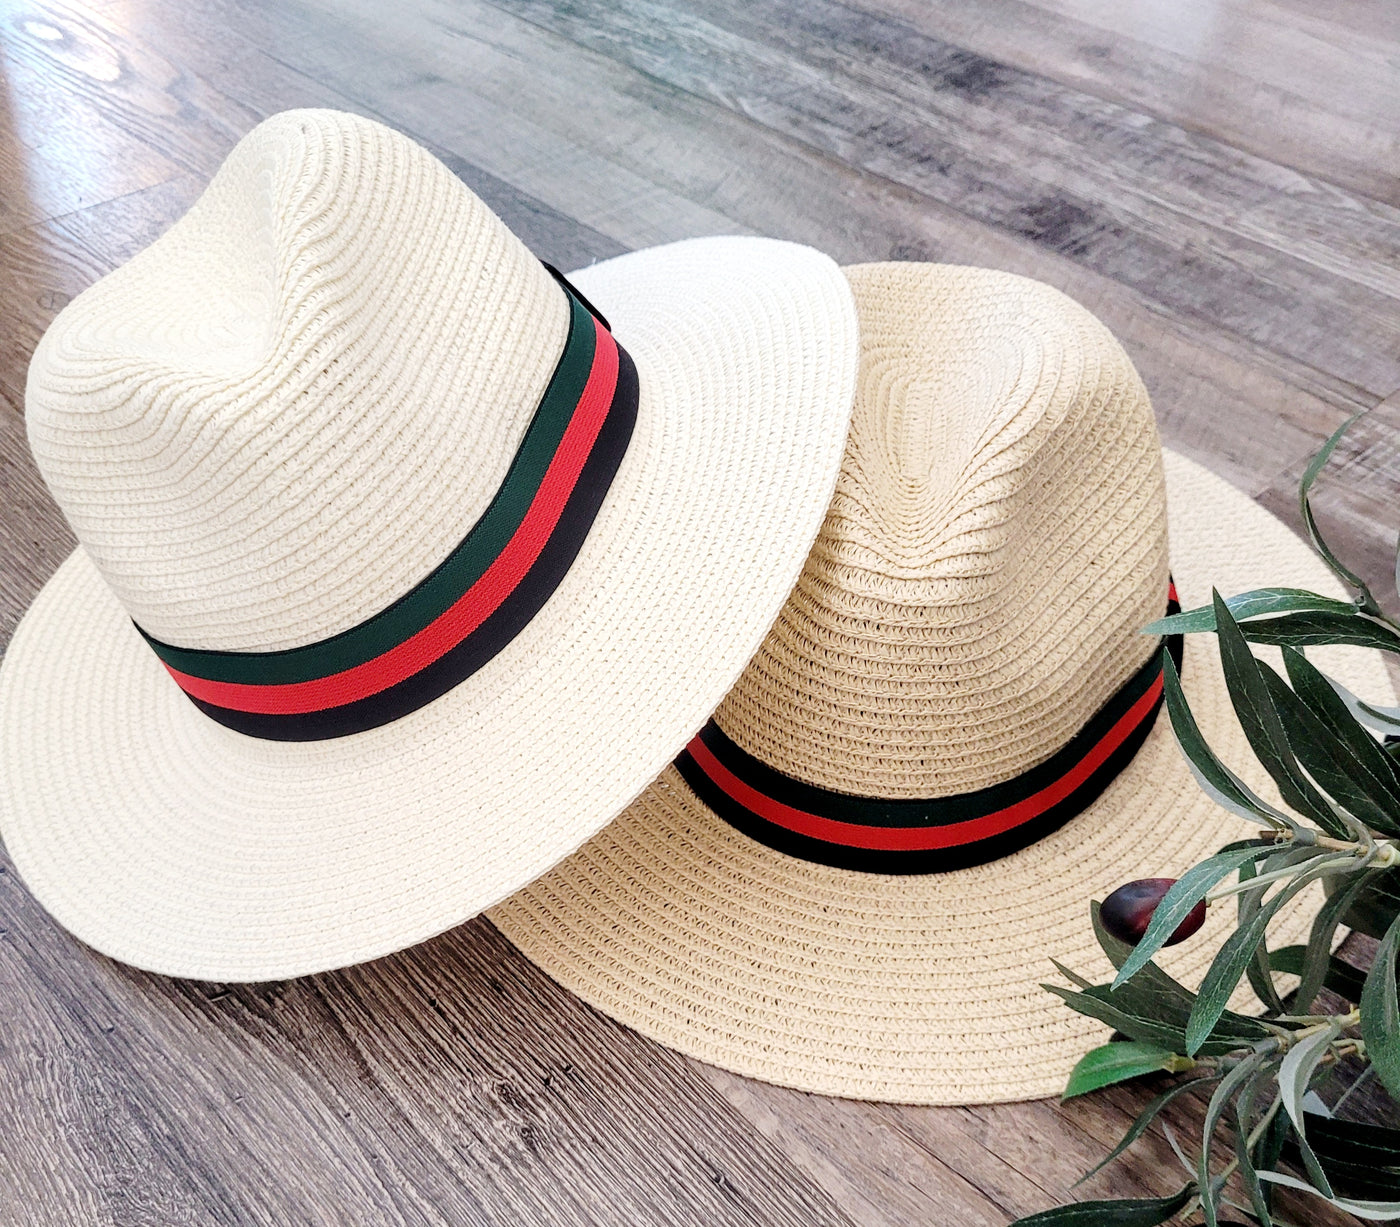 red, green, and black straw hat